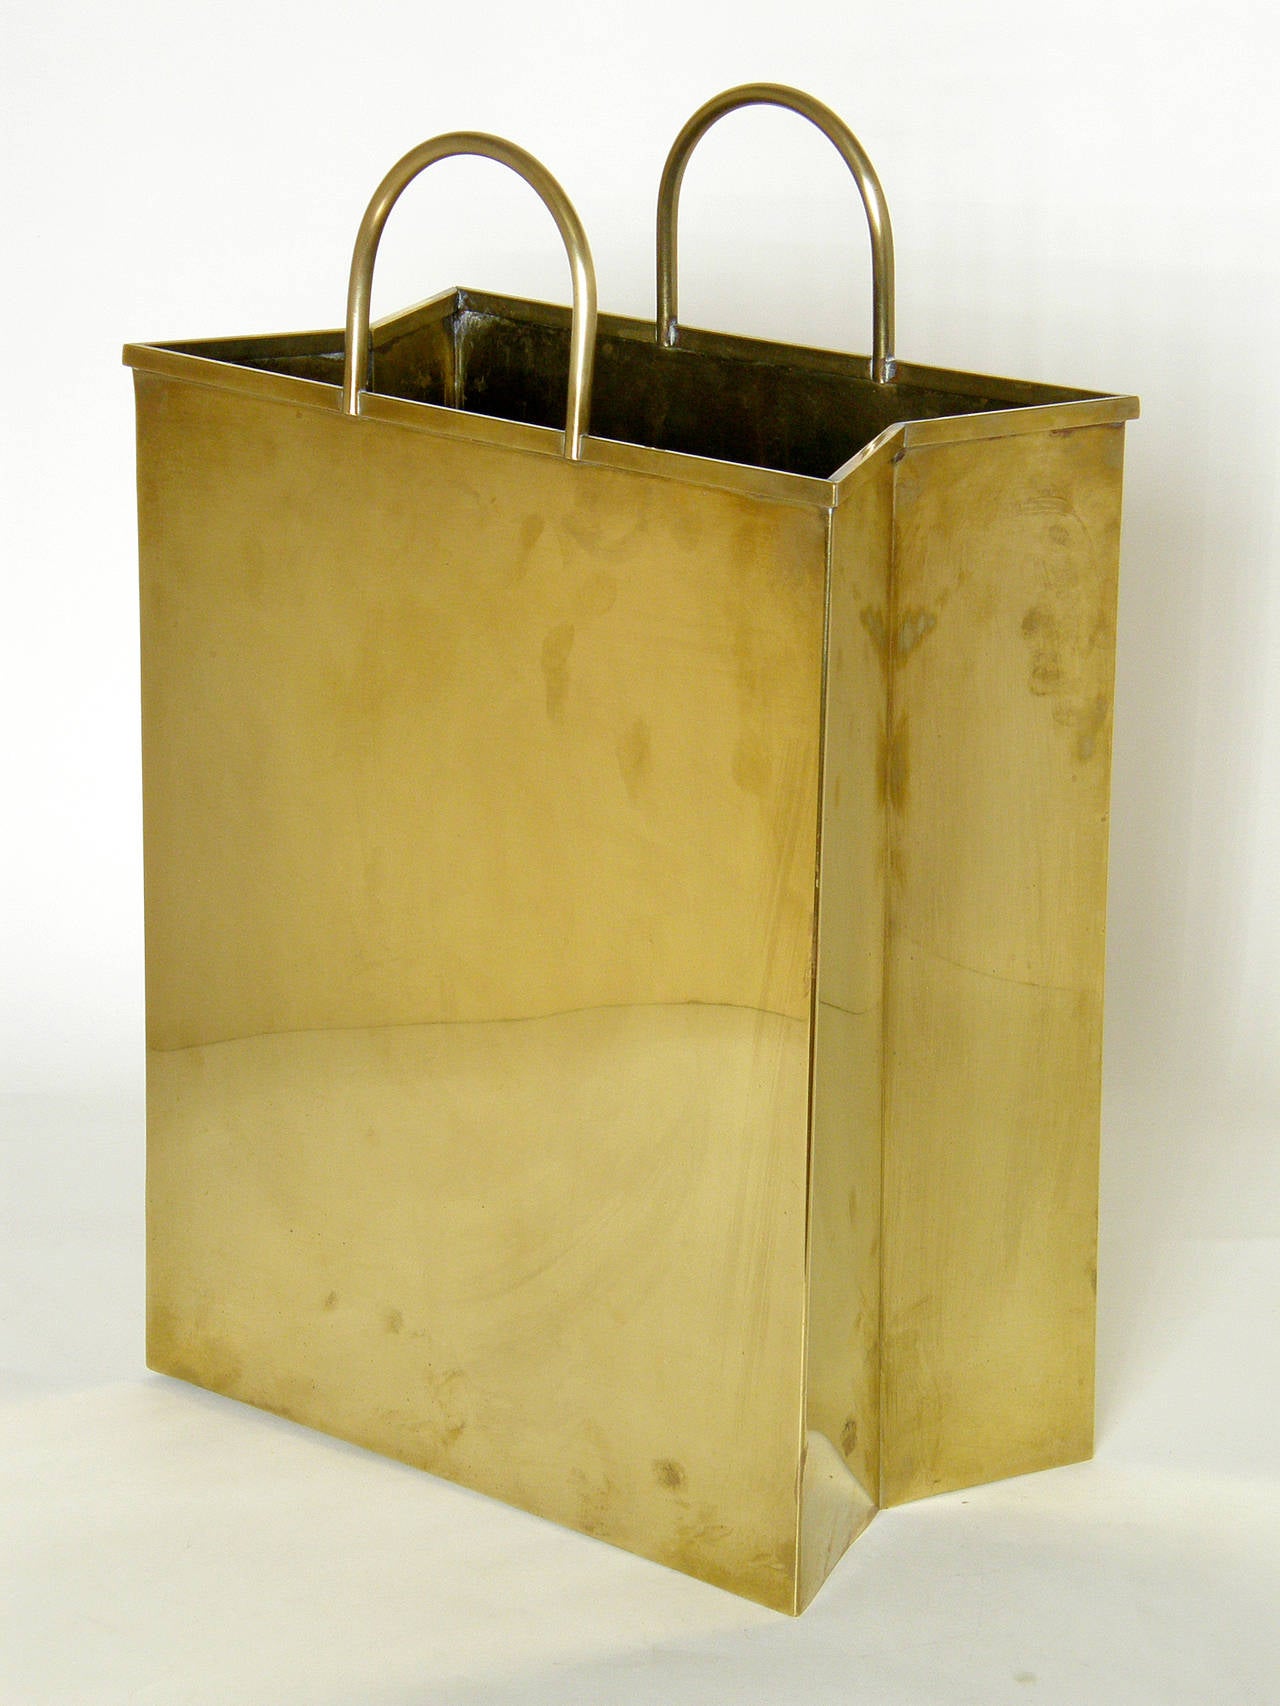 Brass waste basket or magazine holder in the form of a shopping bag. Made in Italy.

Please use Contact Dealer button if you have any questions.